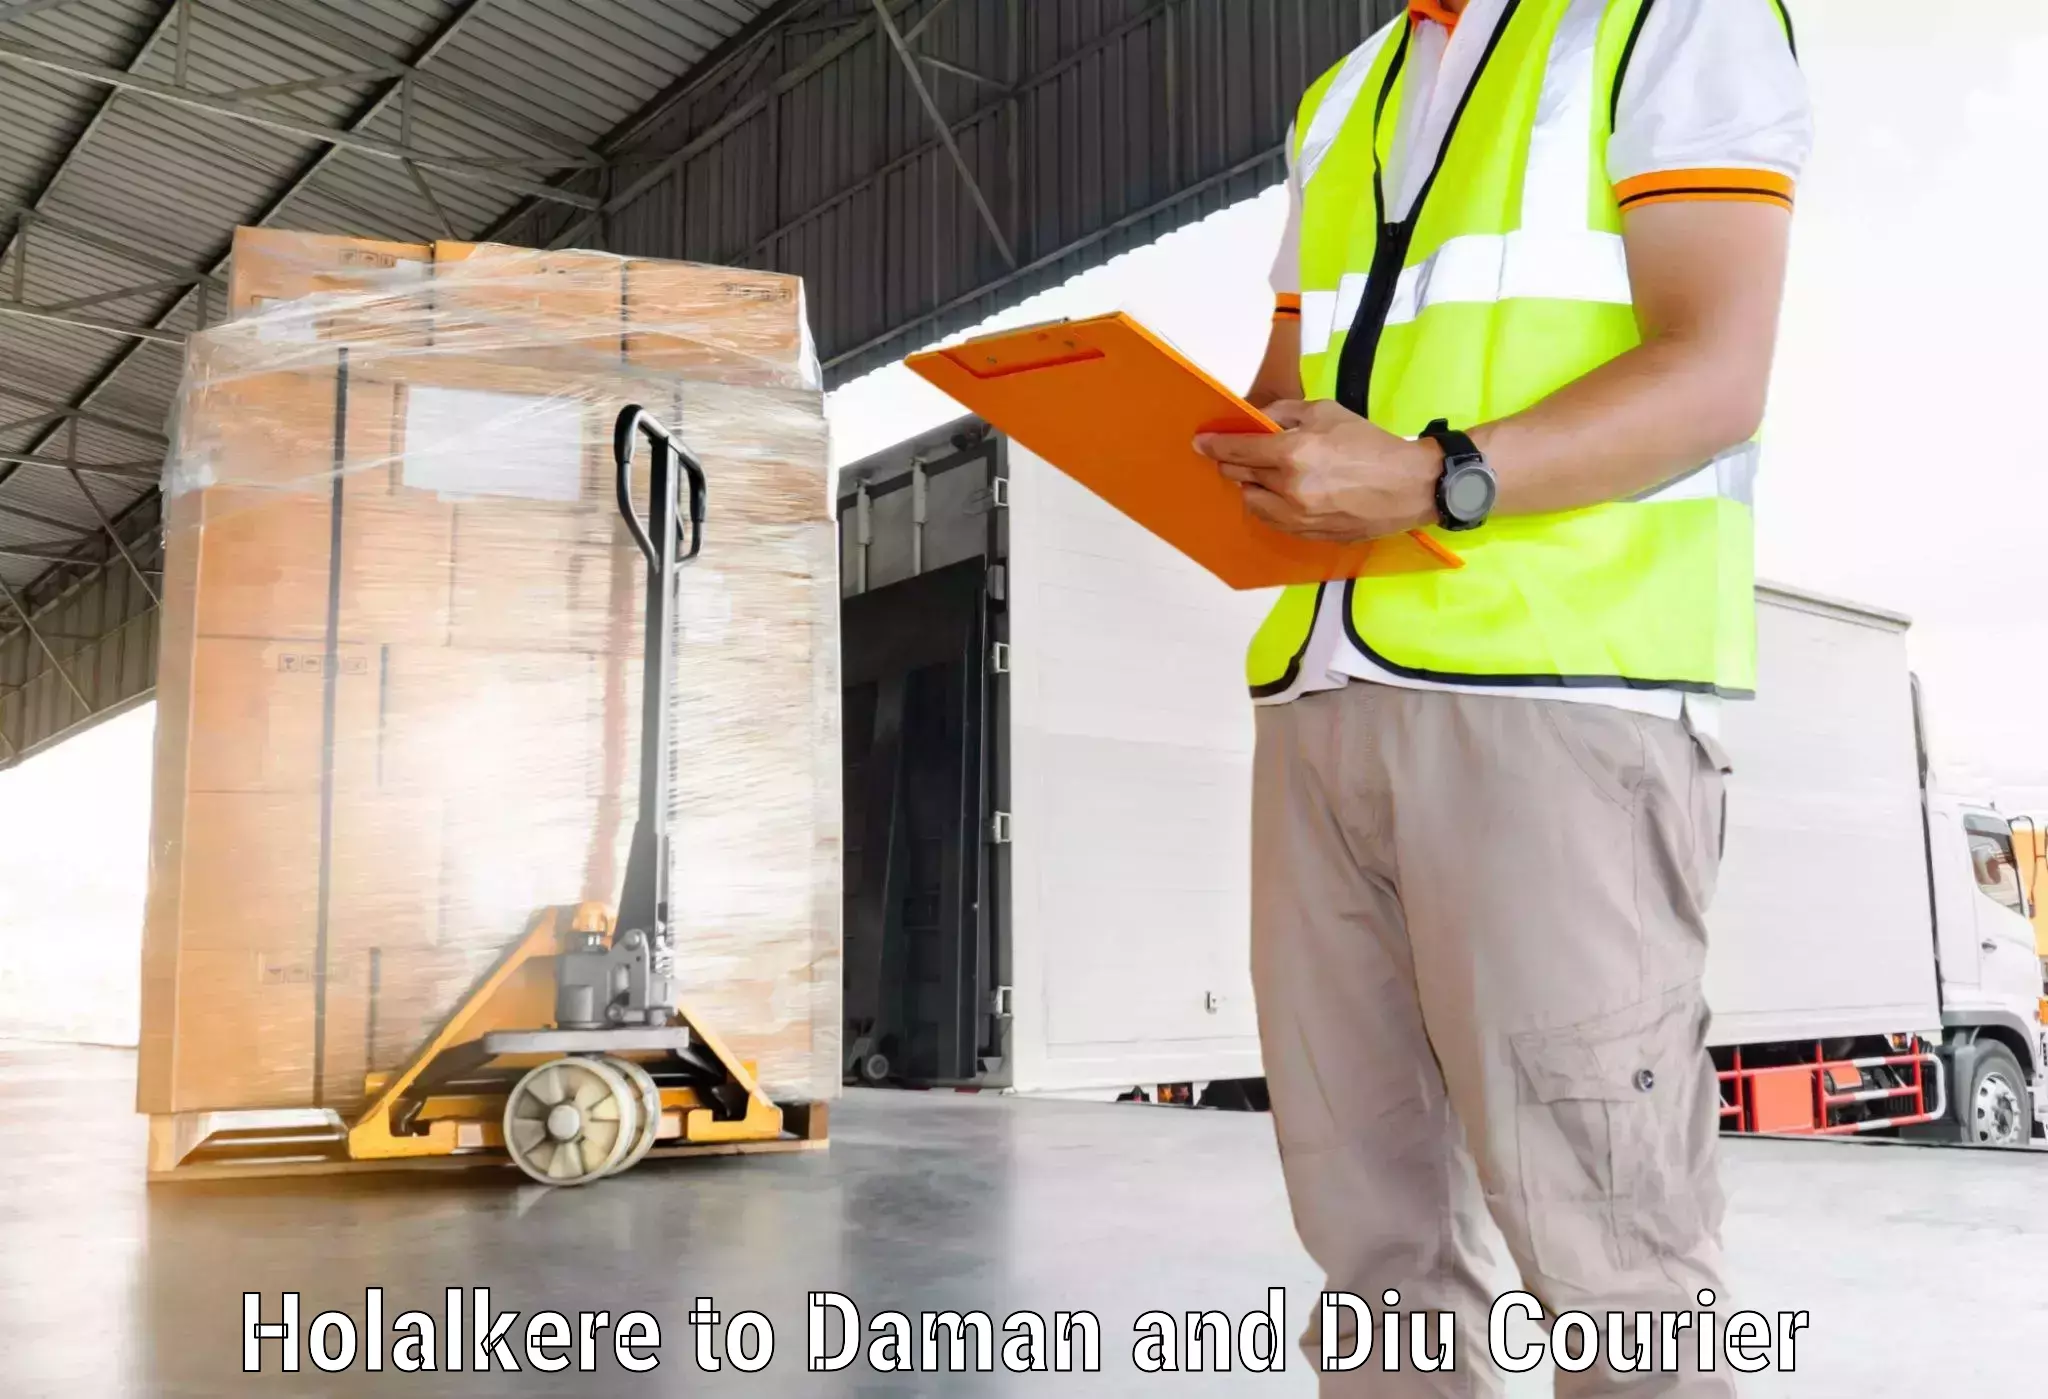 On-time delivery services Holalkere to Daman and Diu